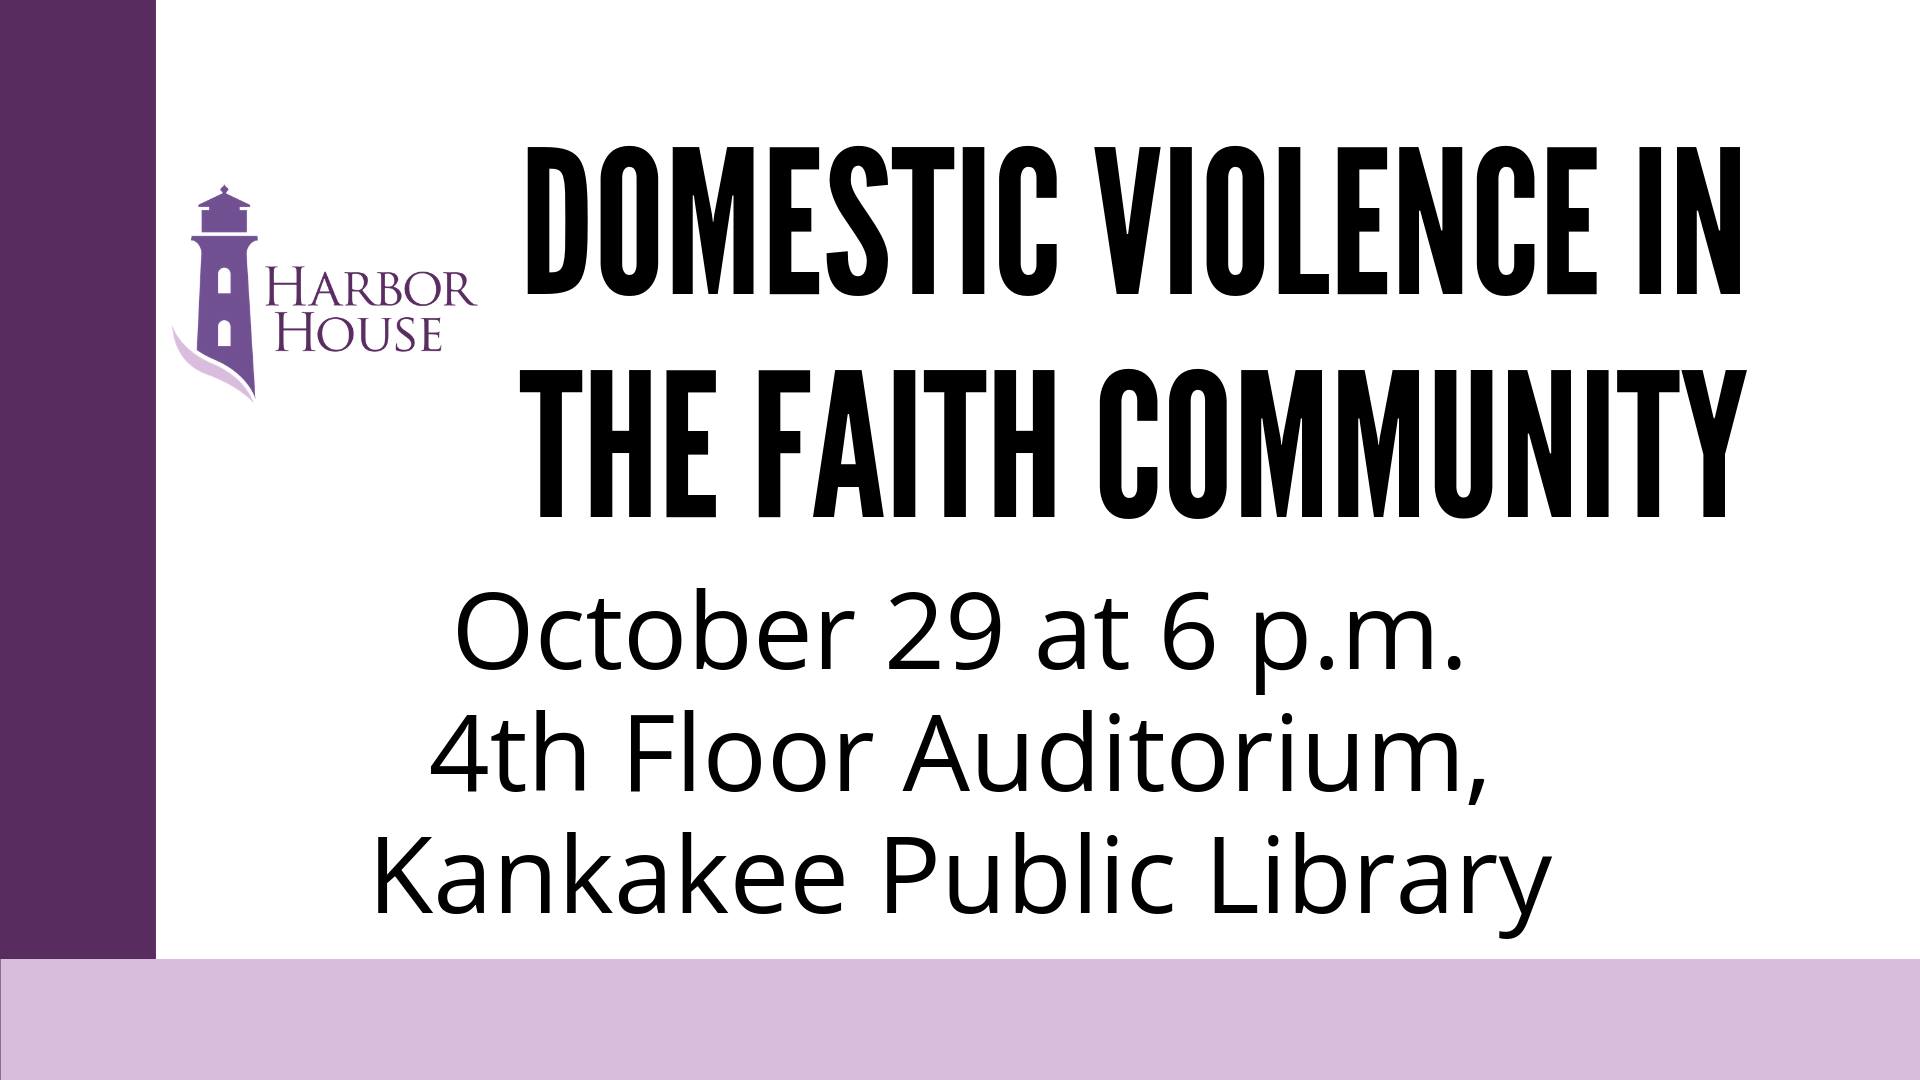 Harbor House Presents- Domestic Violence in the Faith Community